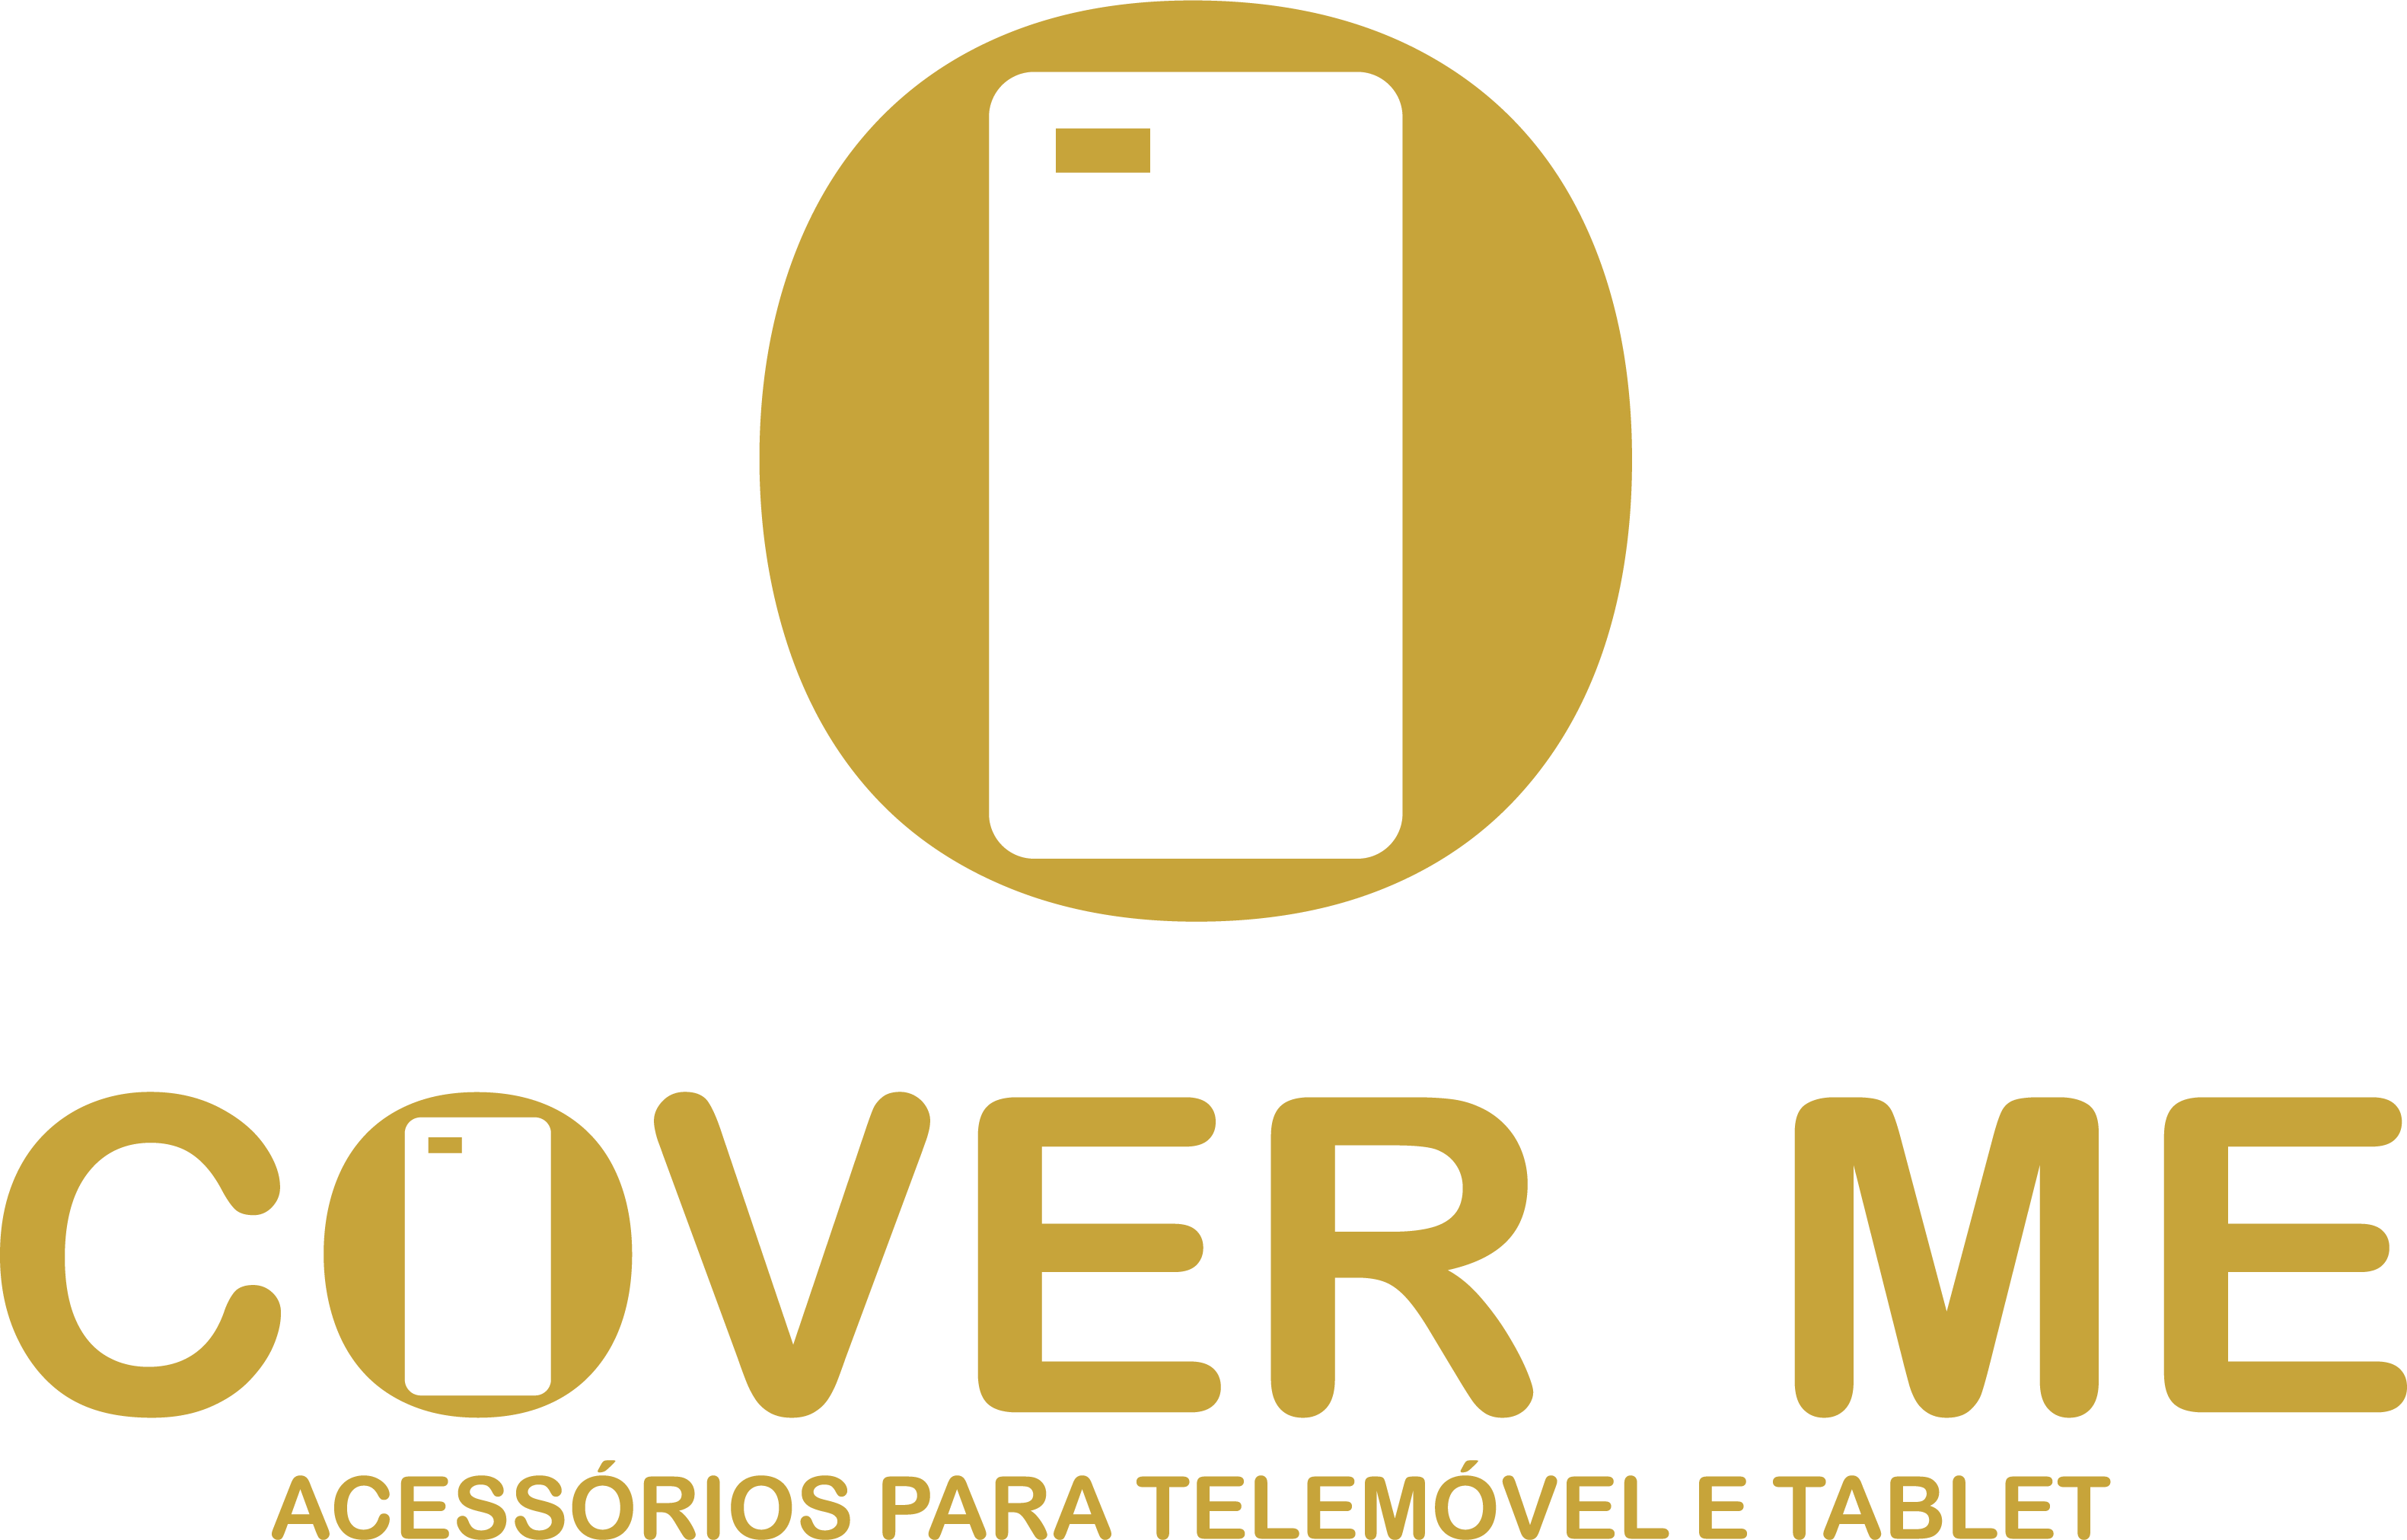 Coverme